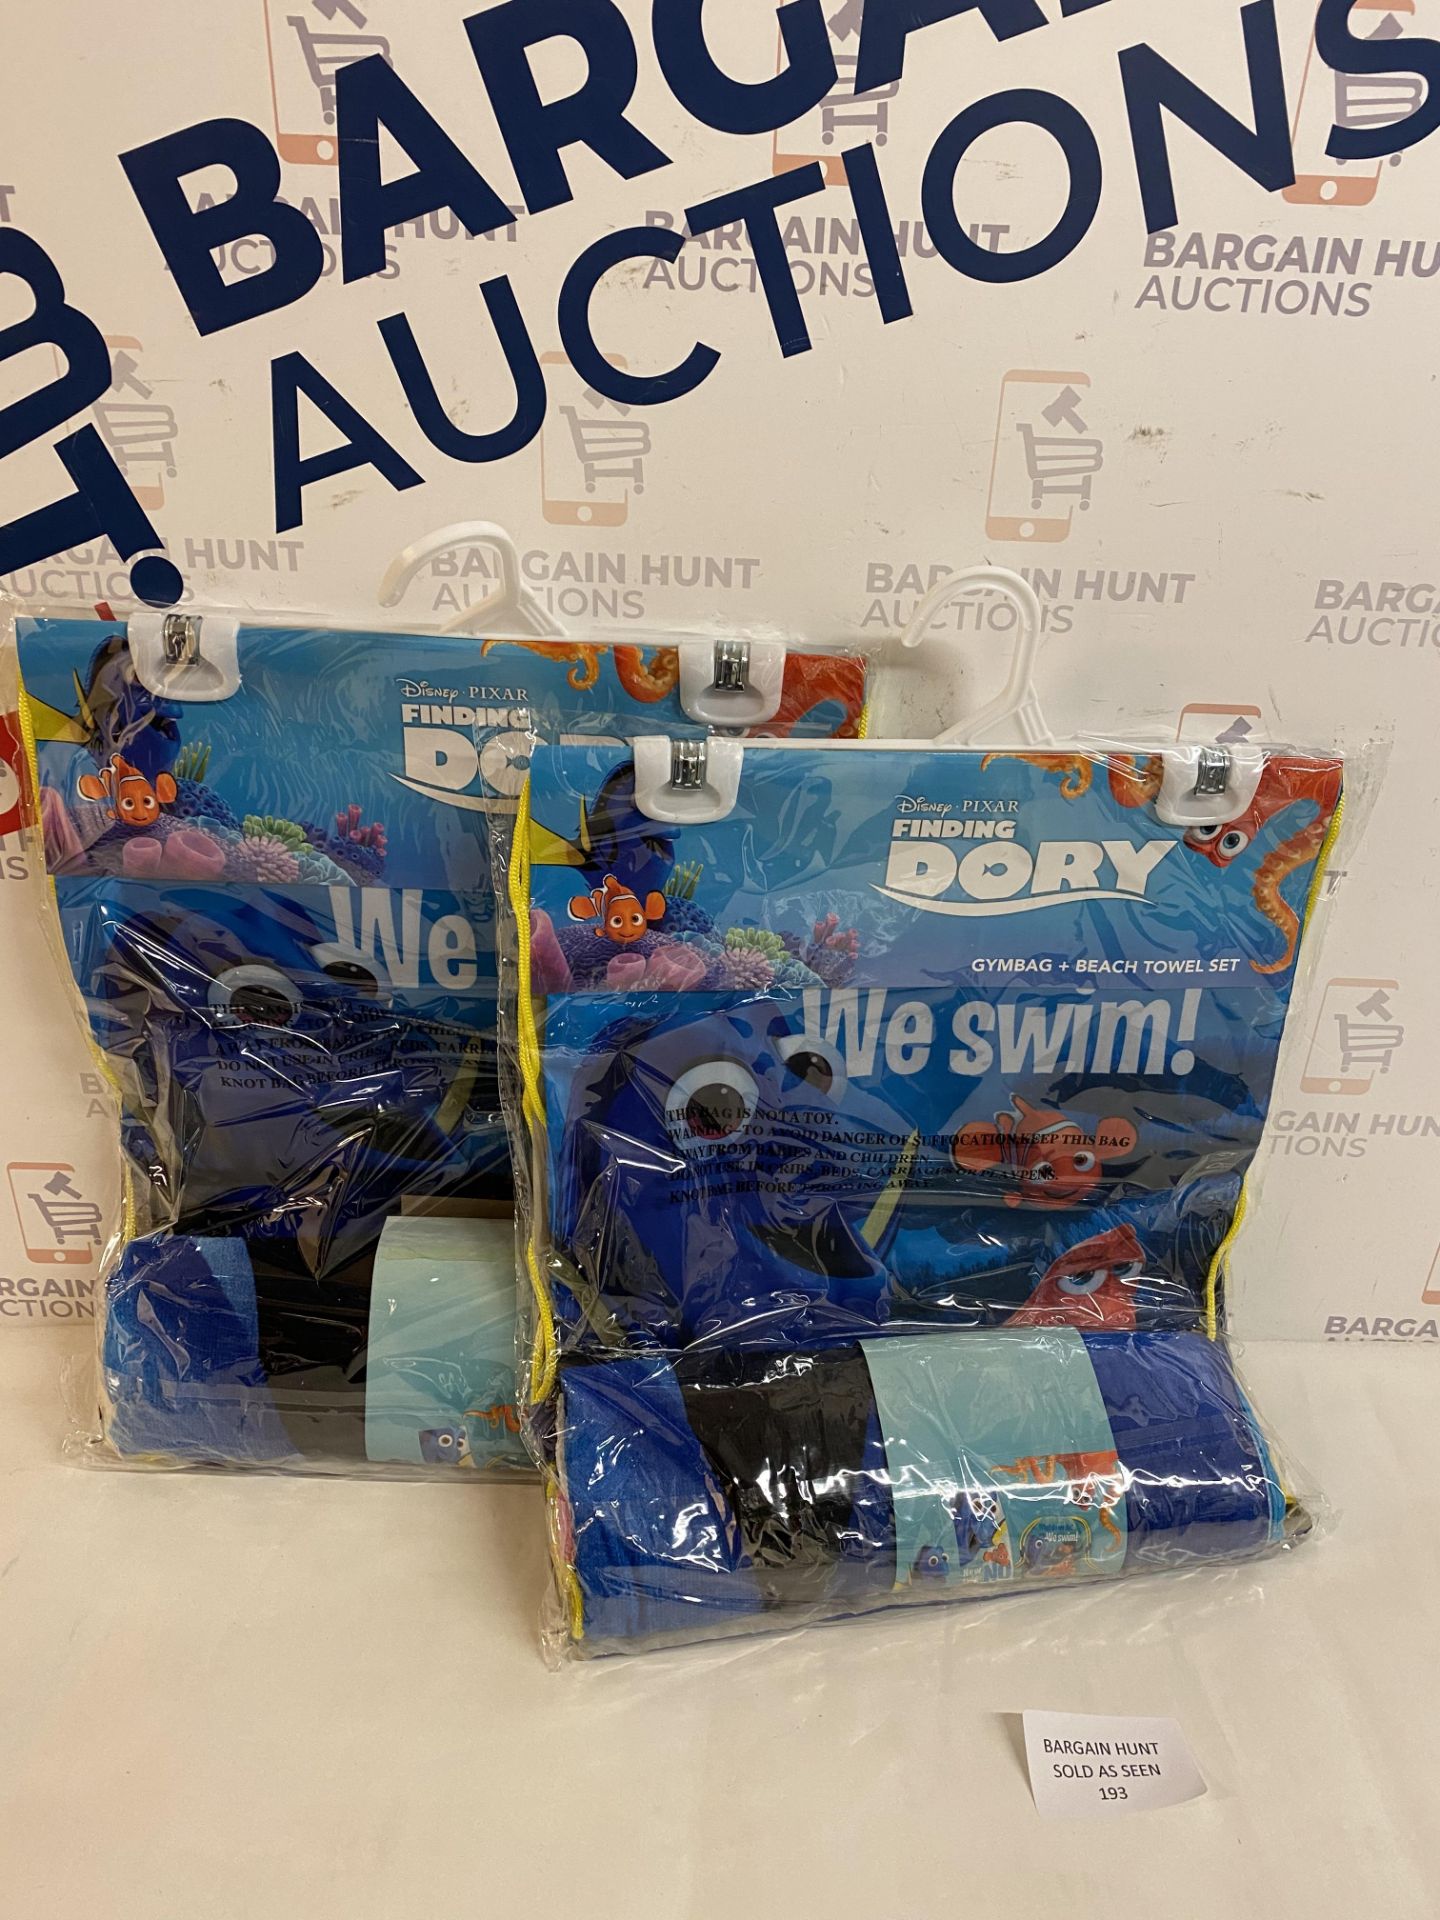 Brand New Disney Finding Dory Gymbag and Beach Towel Set, Set of 2